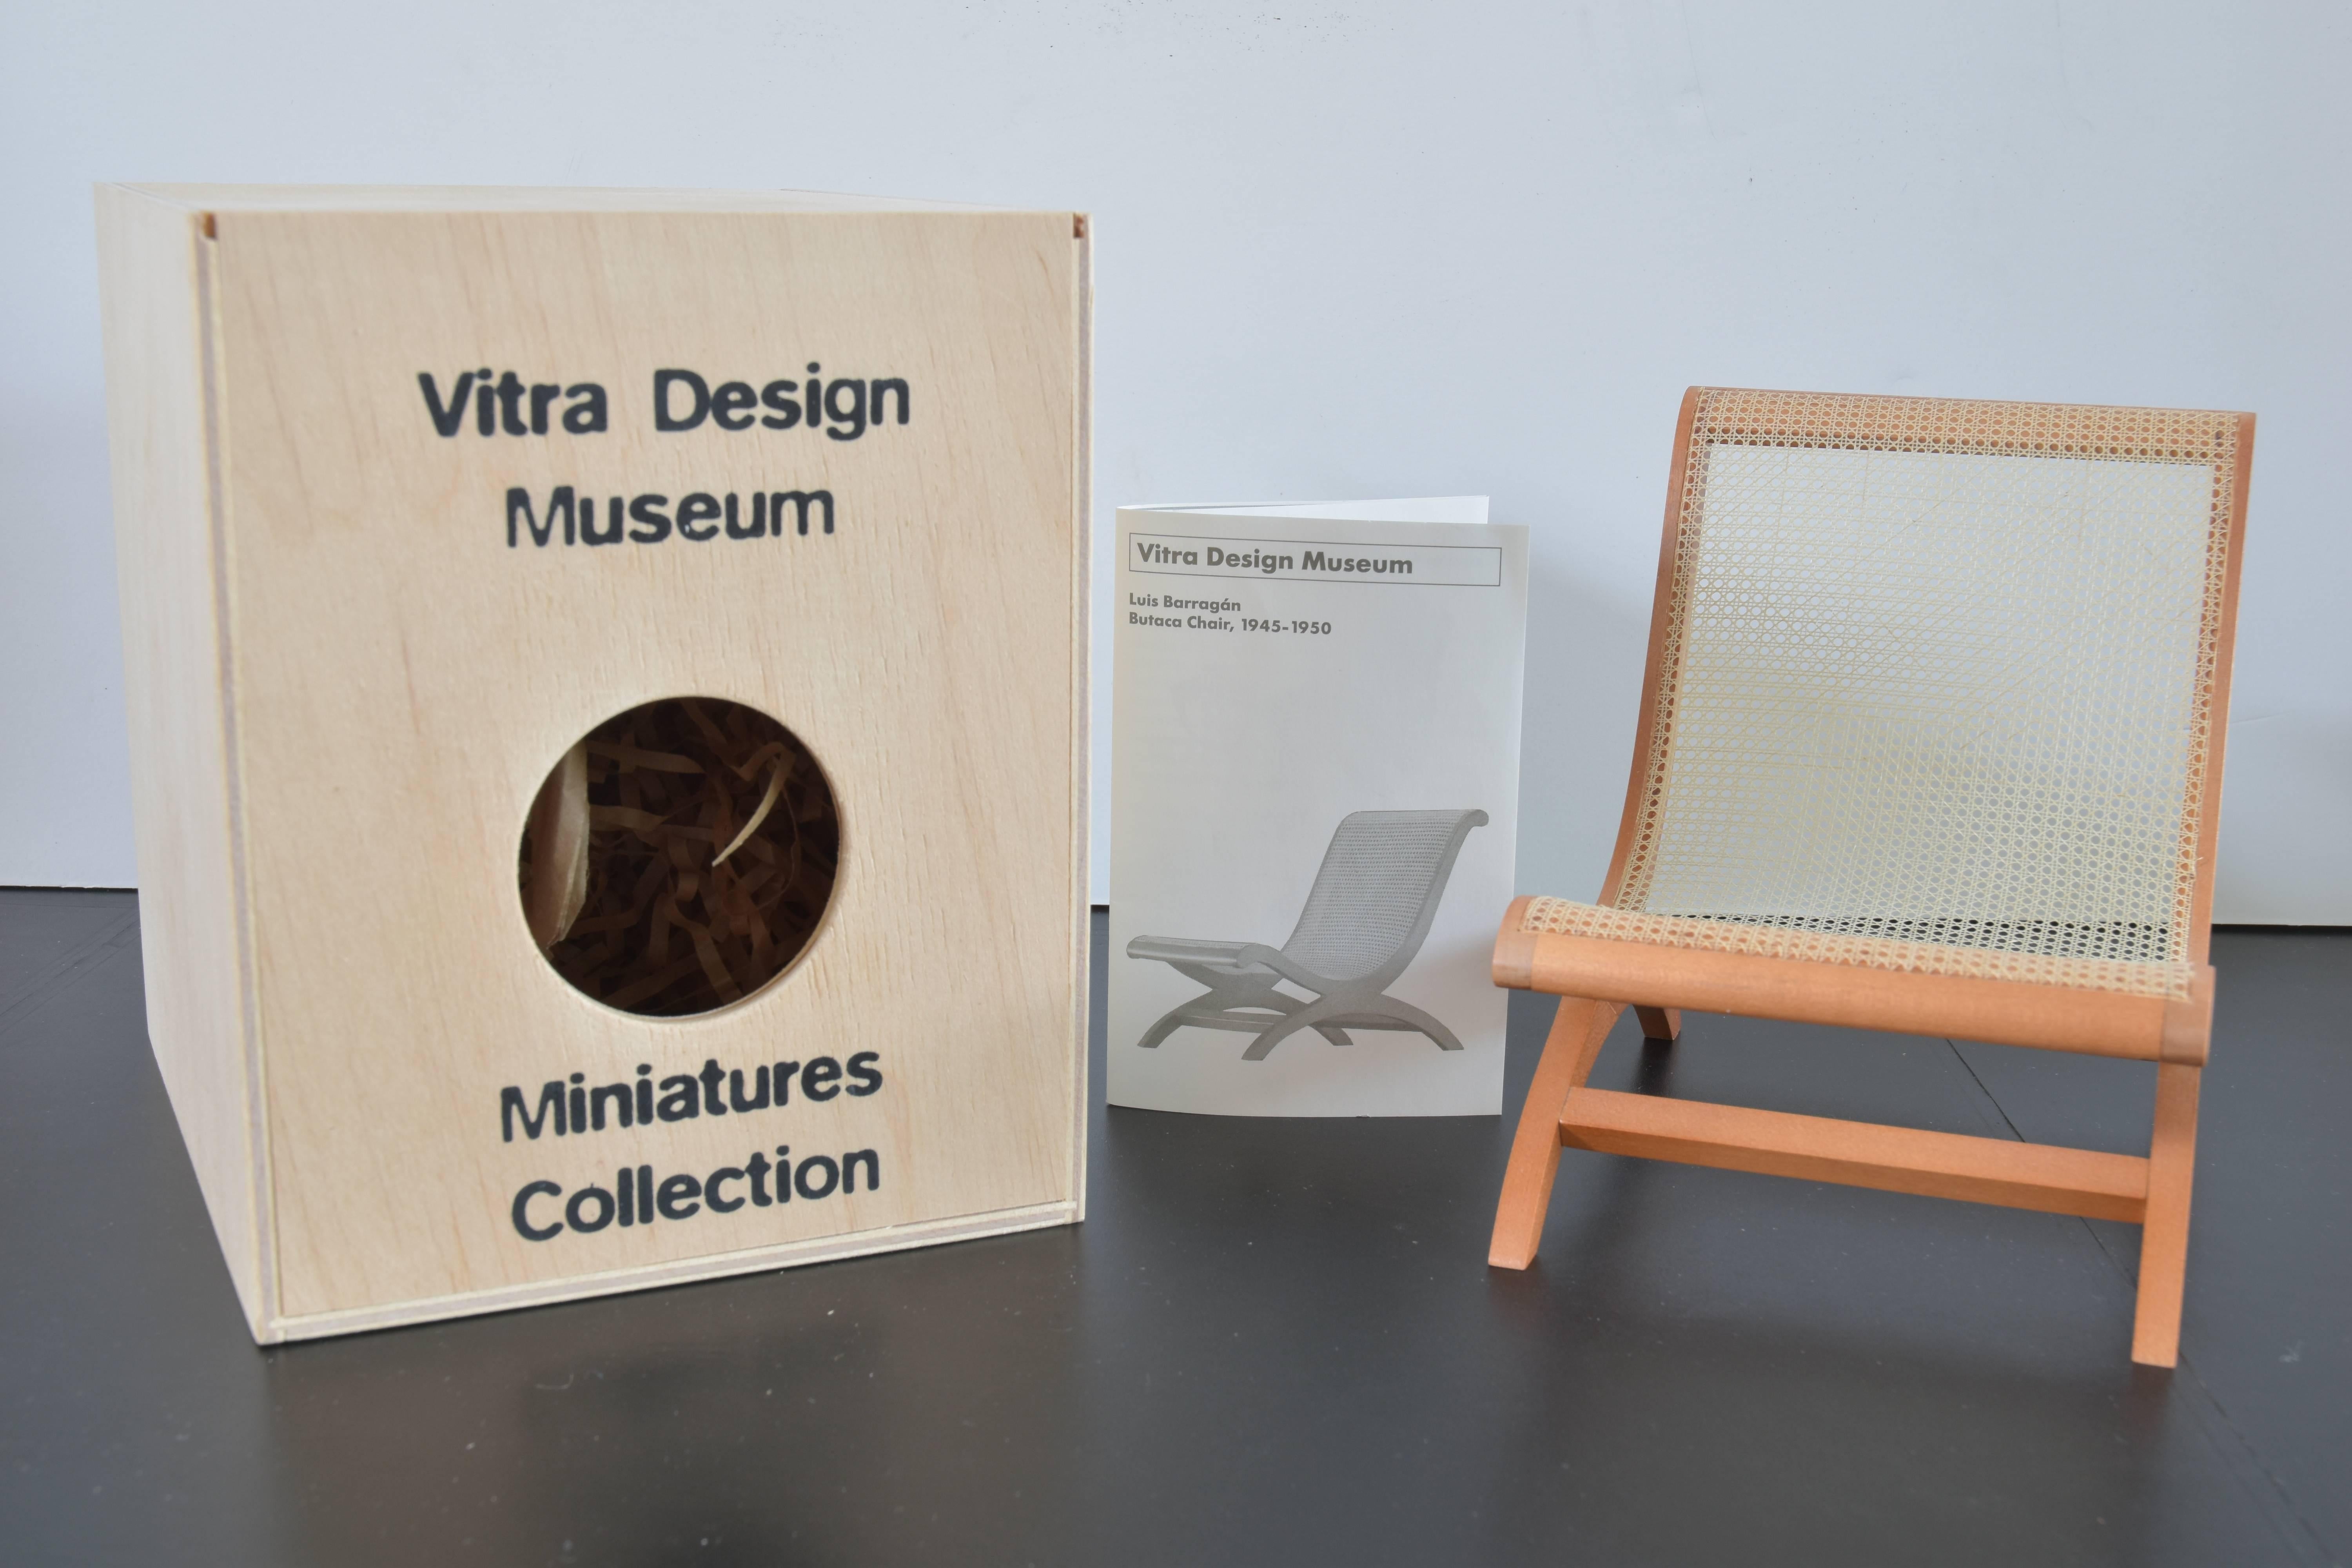 From the Vitra design museum miniatures collection a Luis Barragan Butaca chair originally produced, 1945-1950.

This miniature model includes the Vitra design museum wooden box and historical brochure which includes a narrative of the designer as